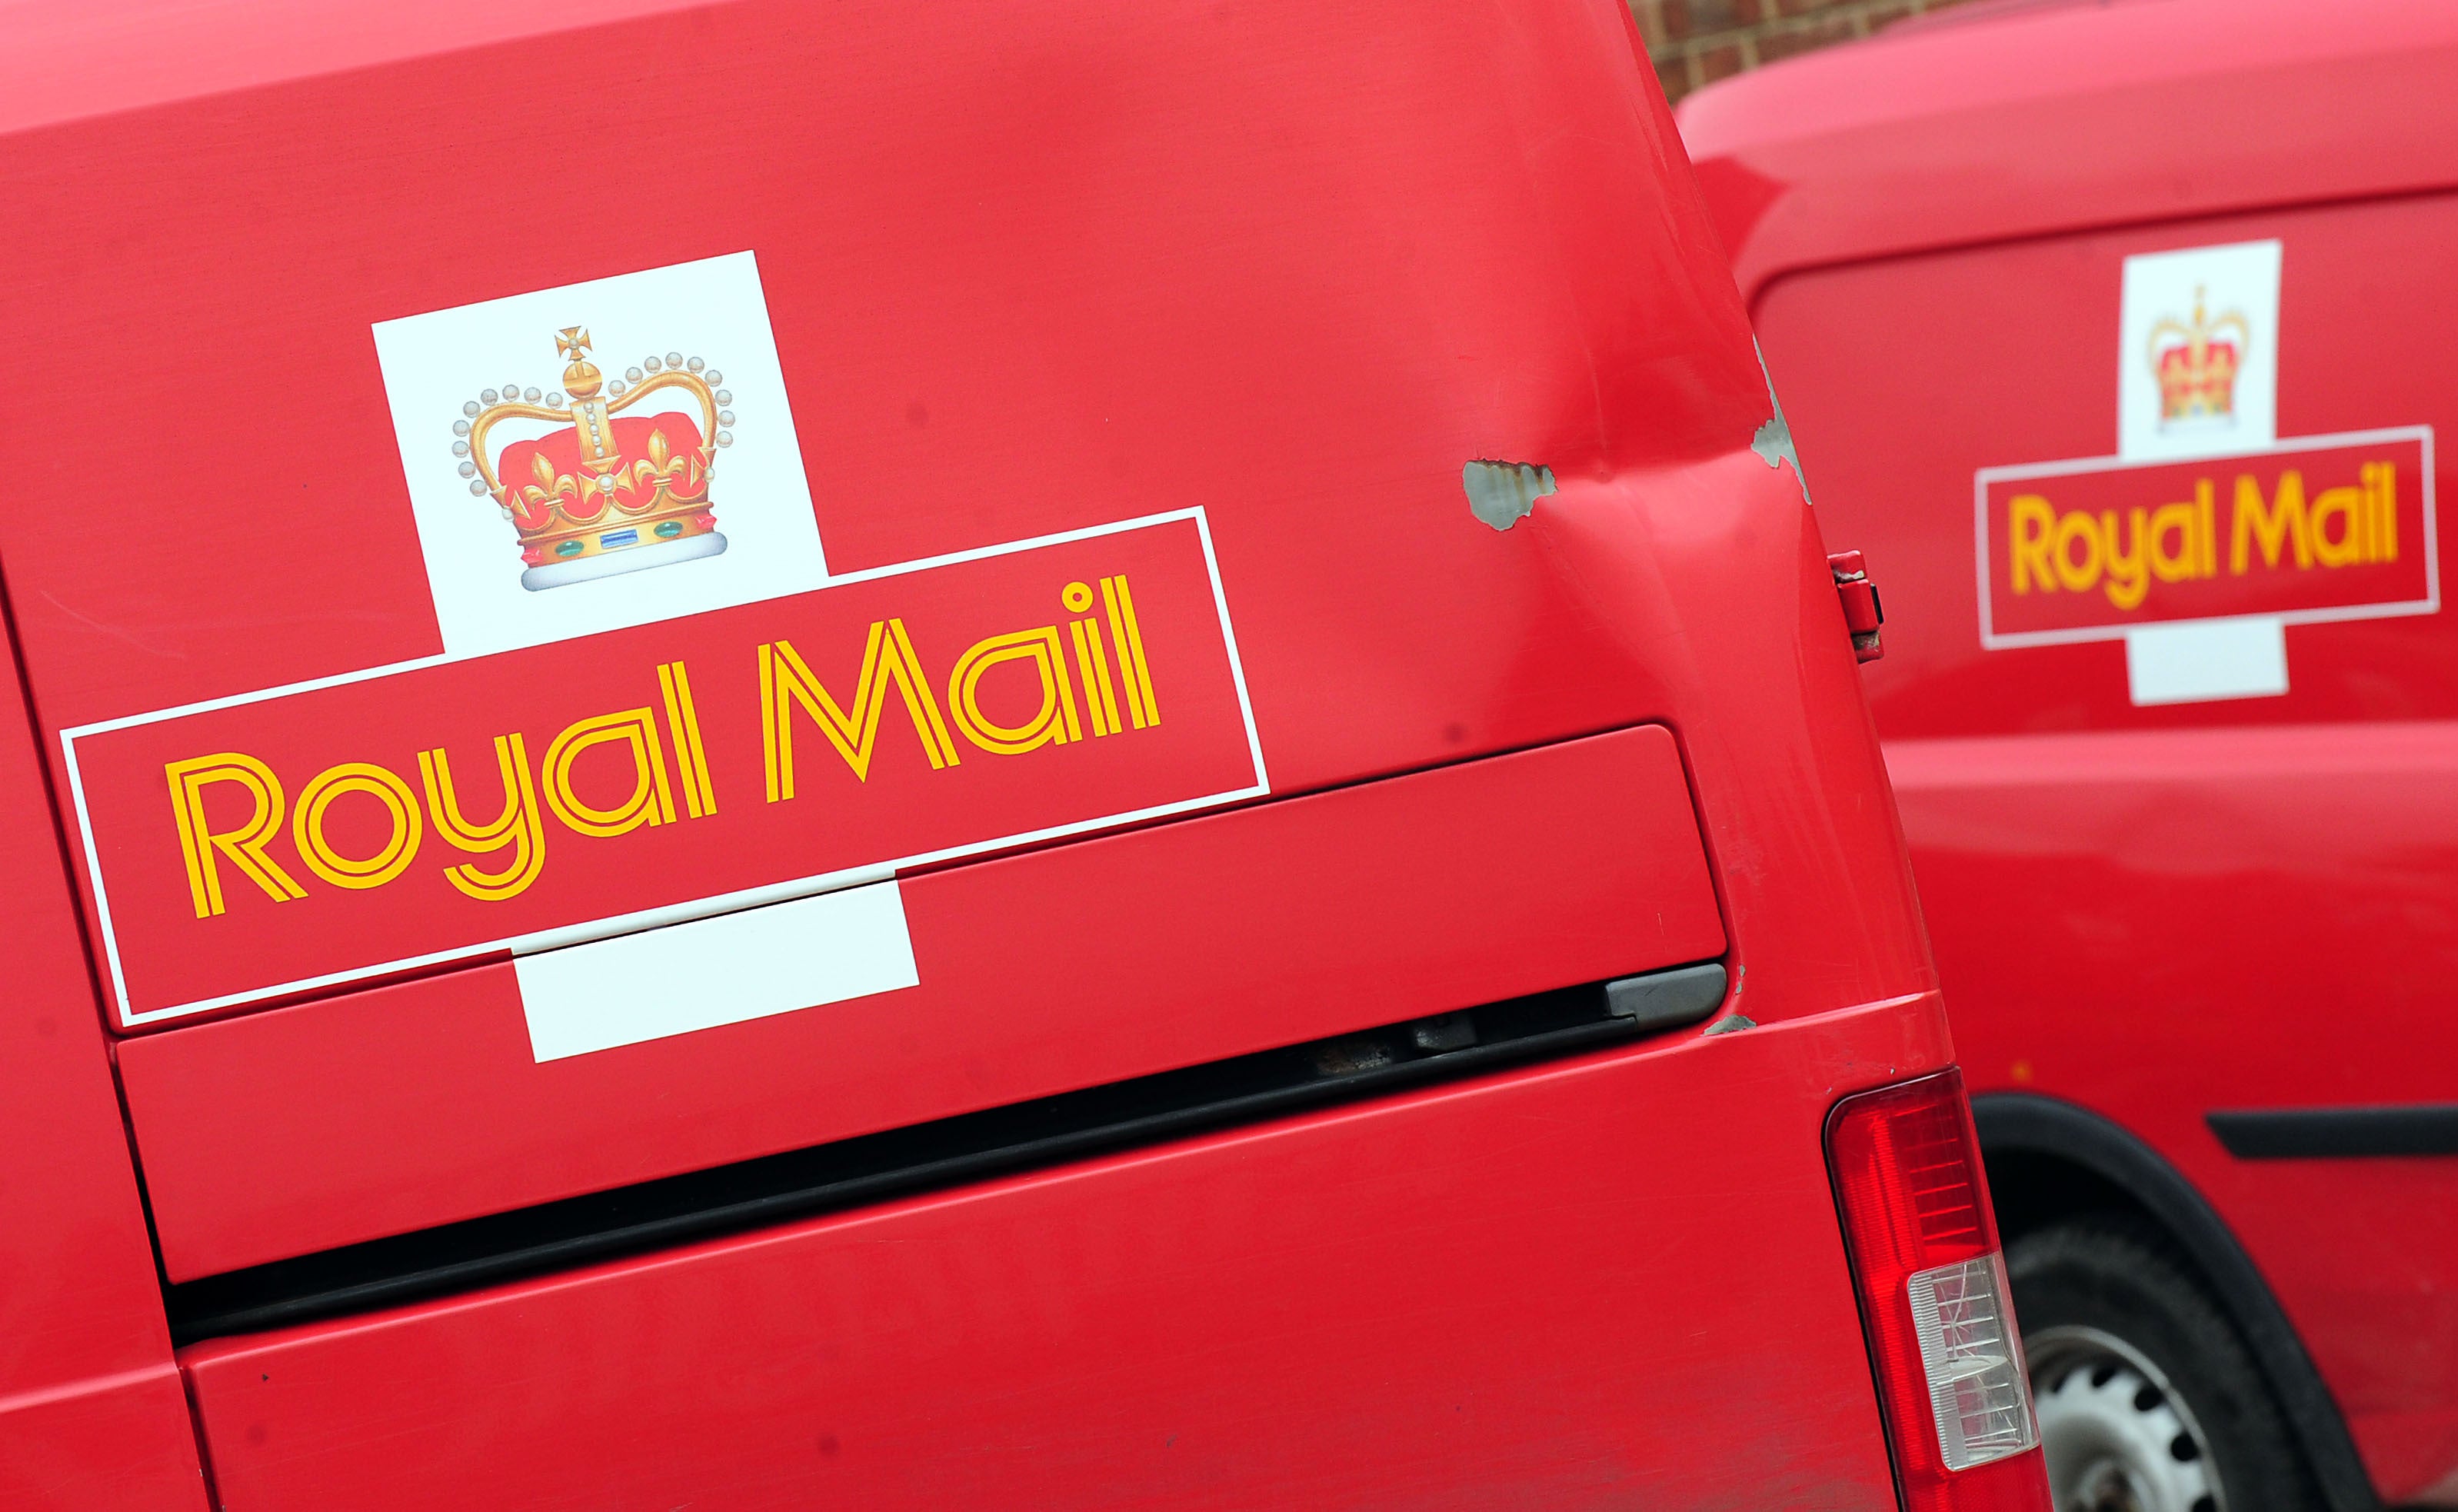 Royal Mail is being warned it could be hit by strikes over plans to cut managers’ jobs (Rui Vieira/PA)